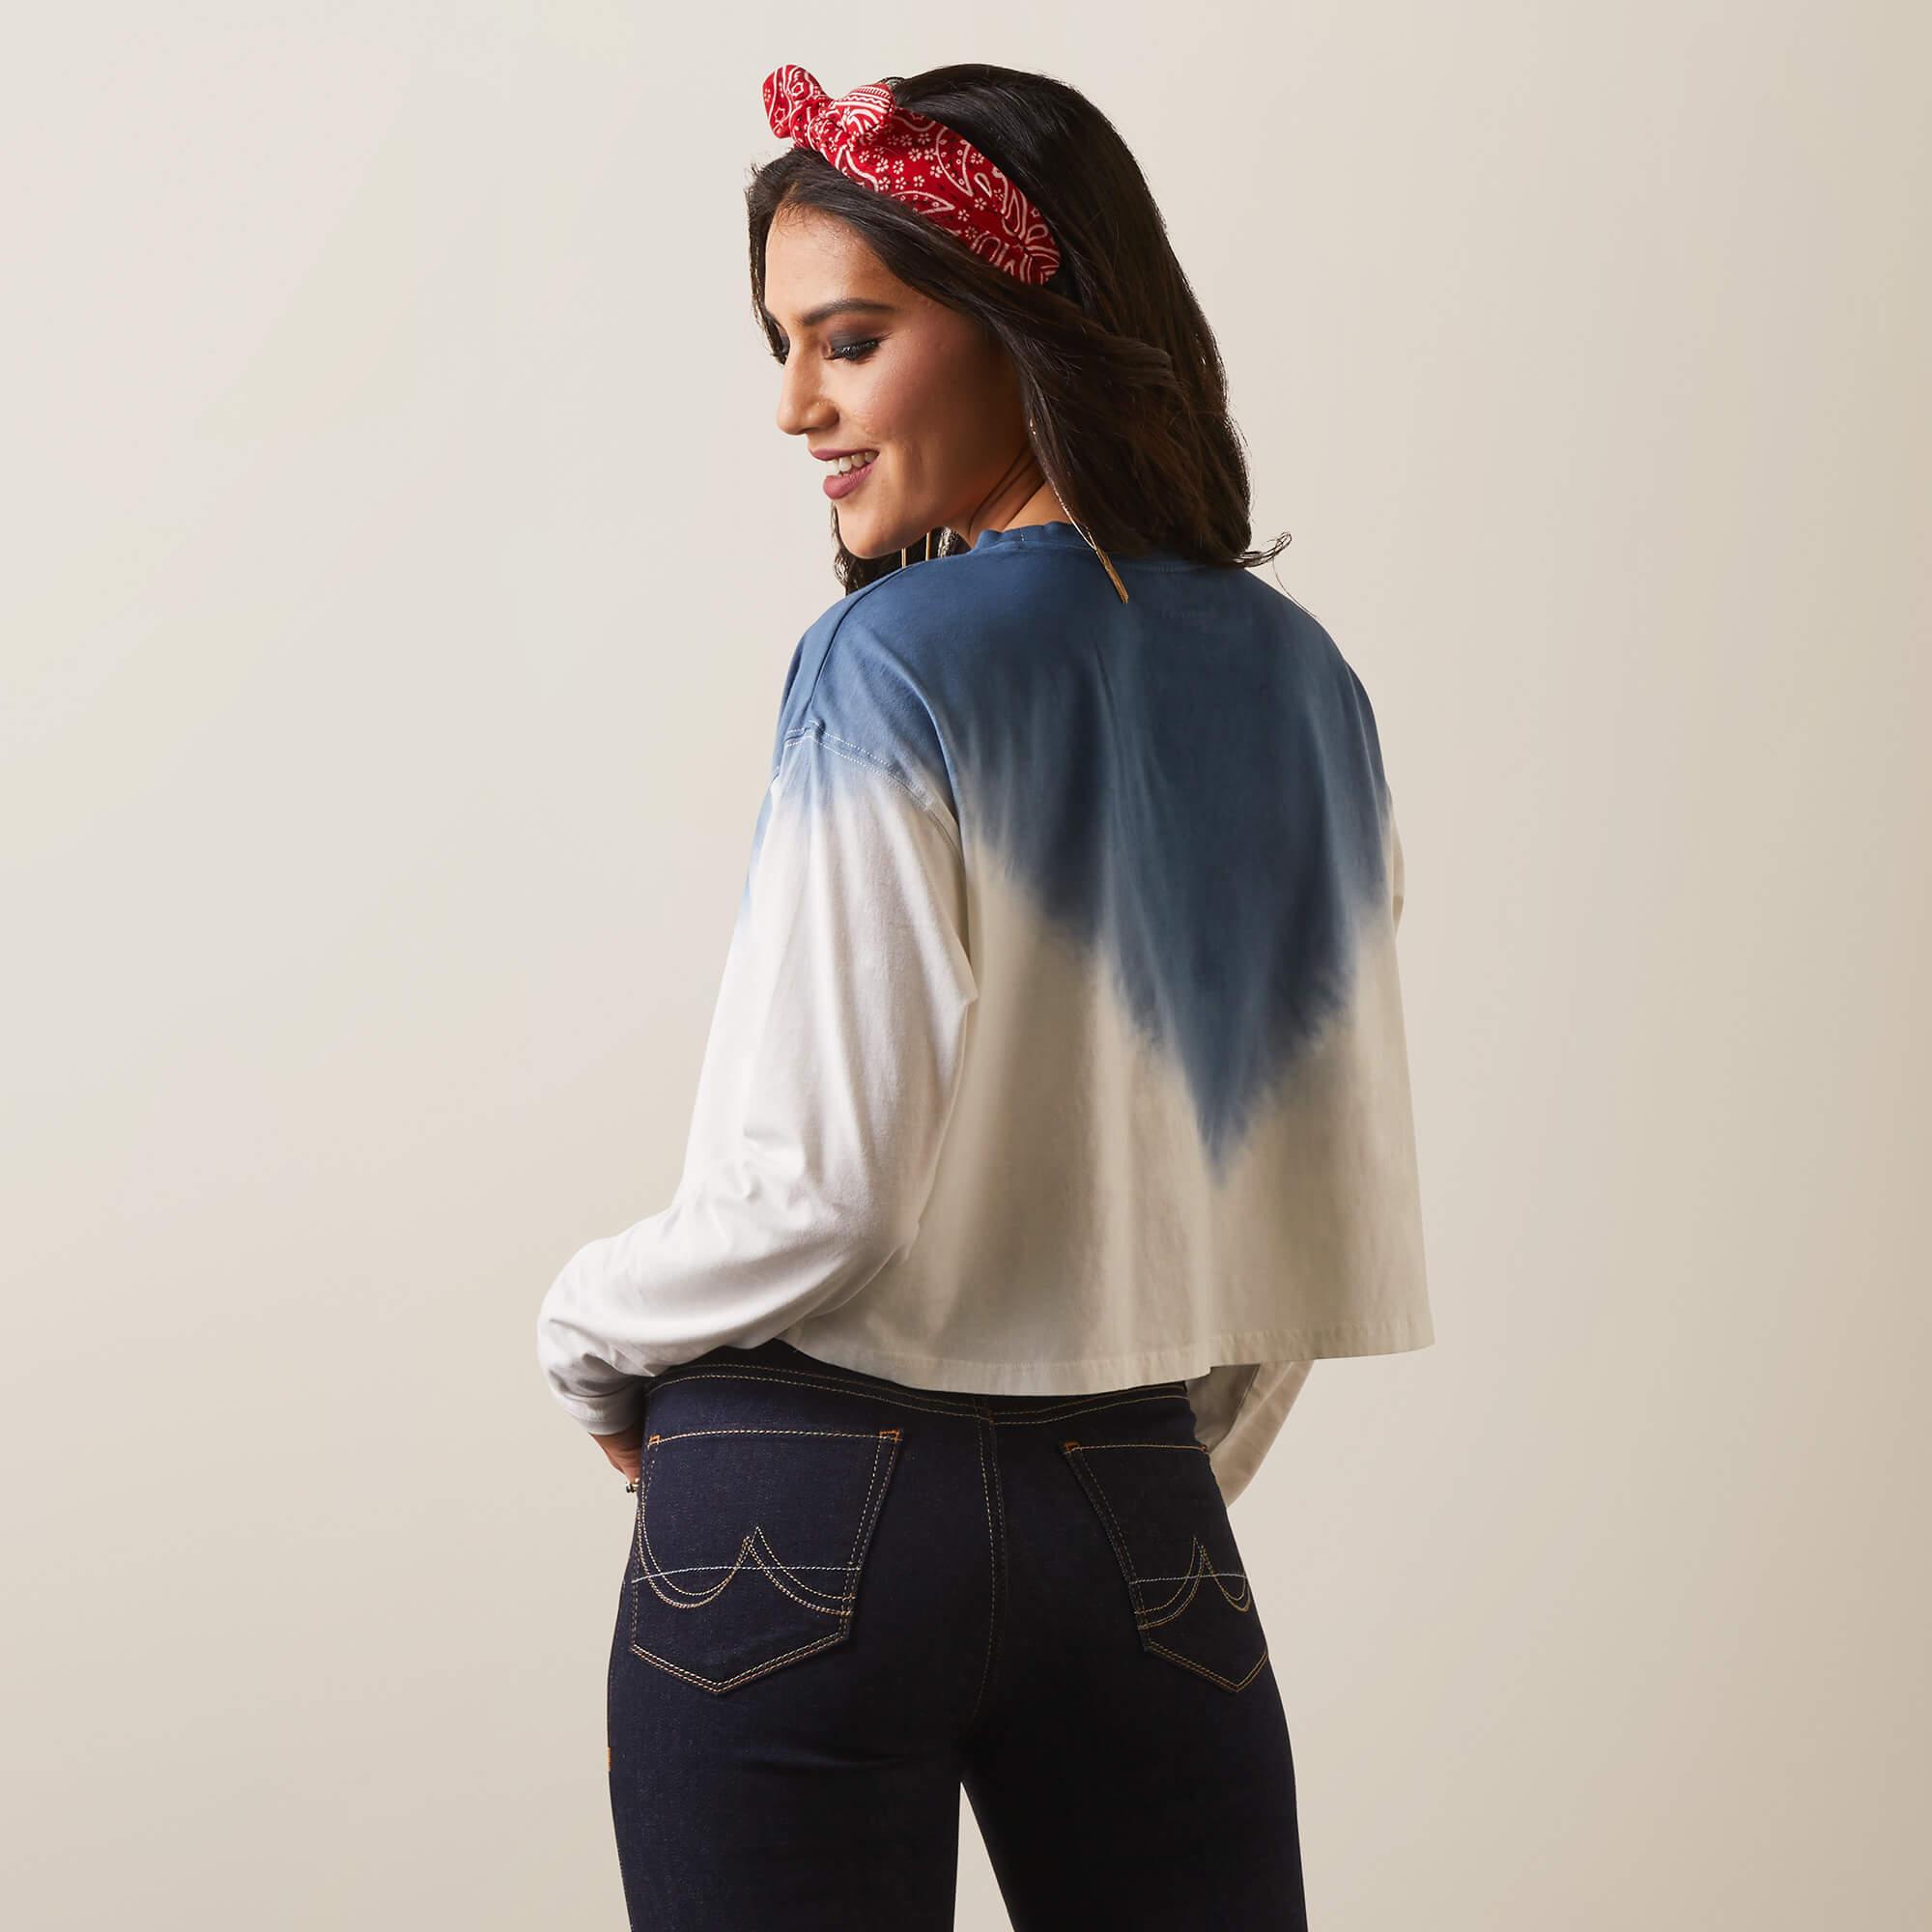 Women's Howdy Ombre Top - White